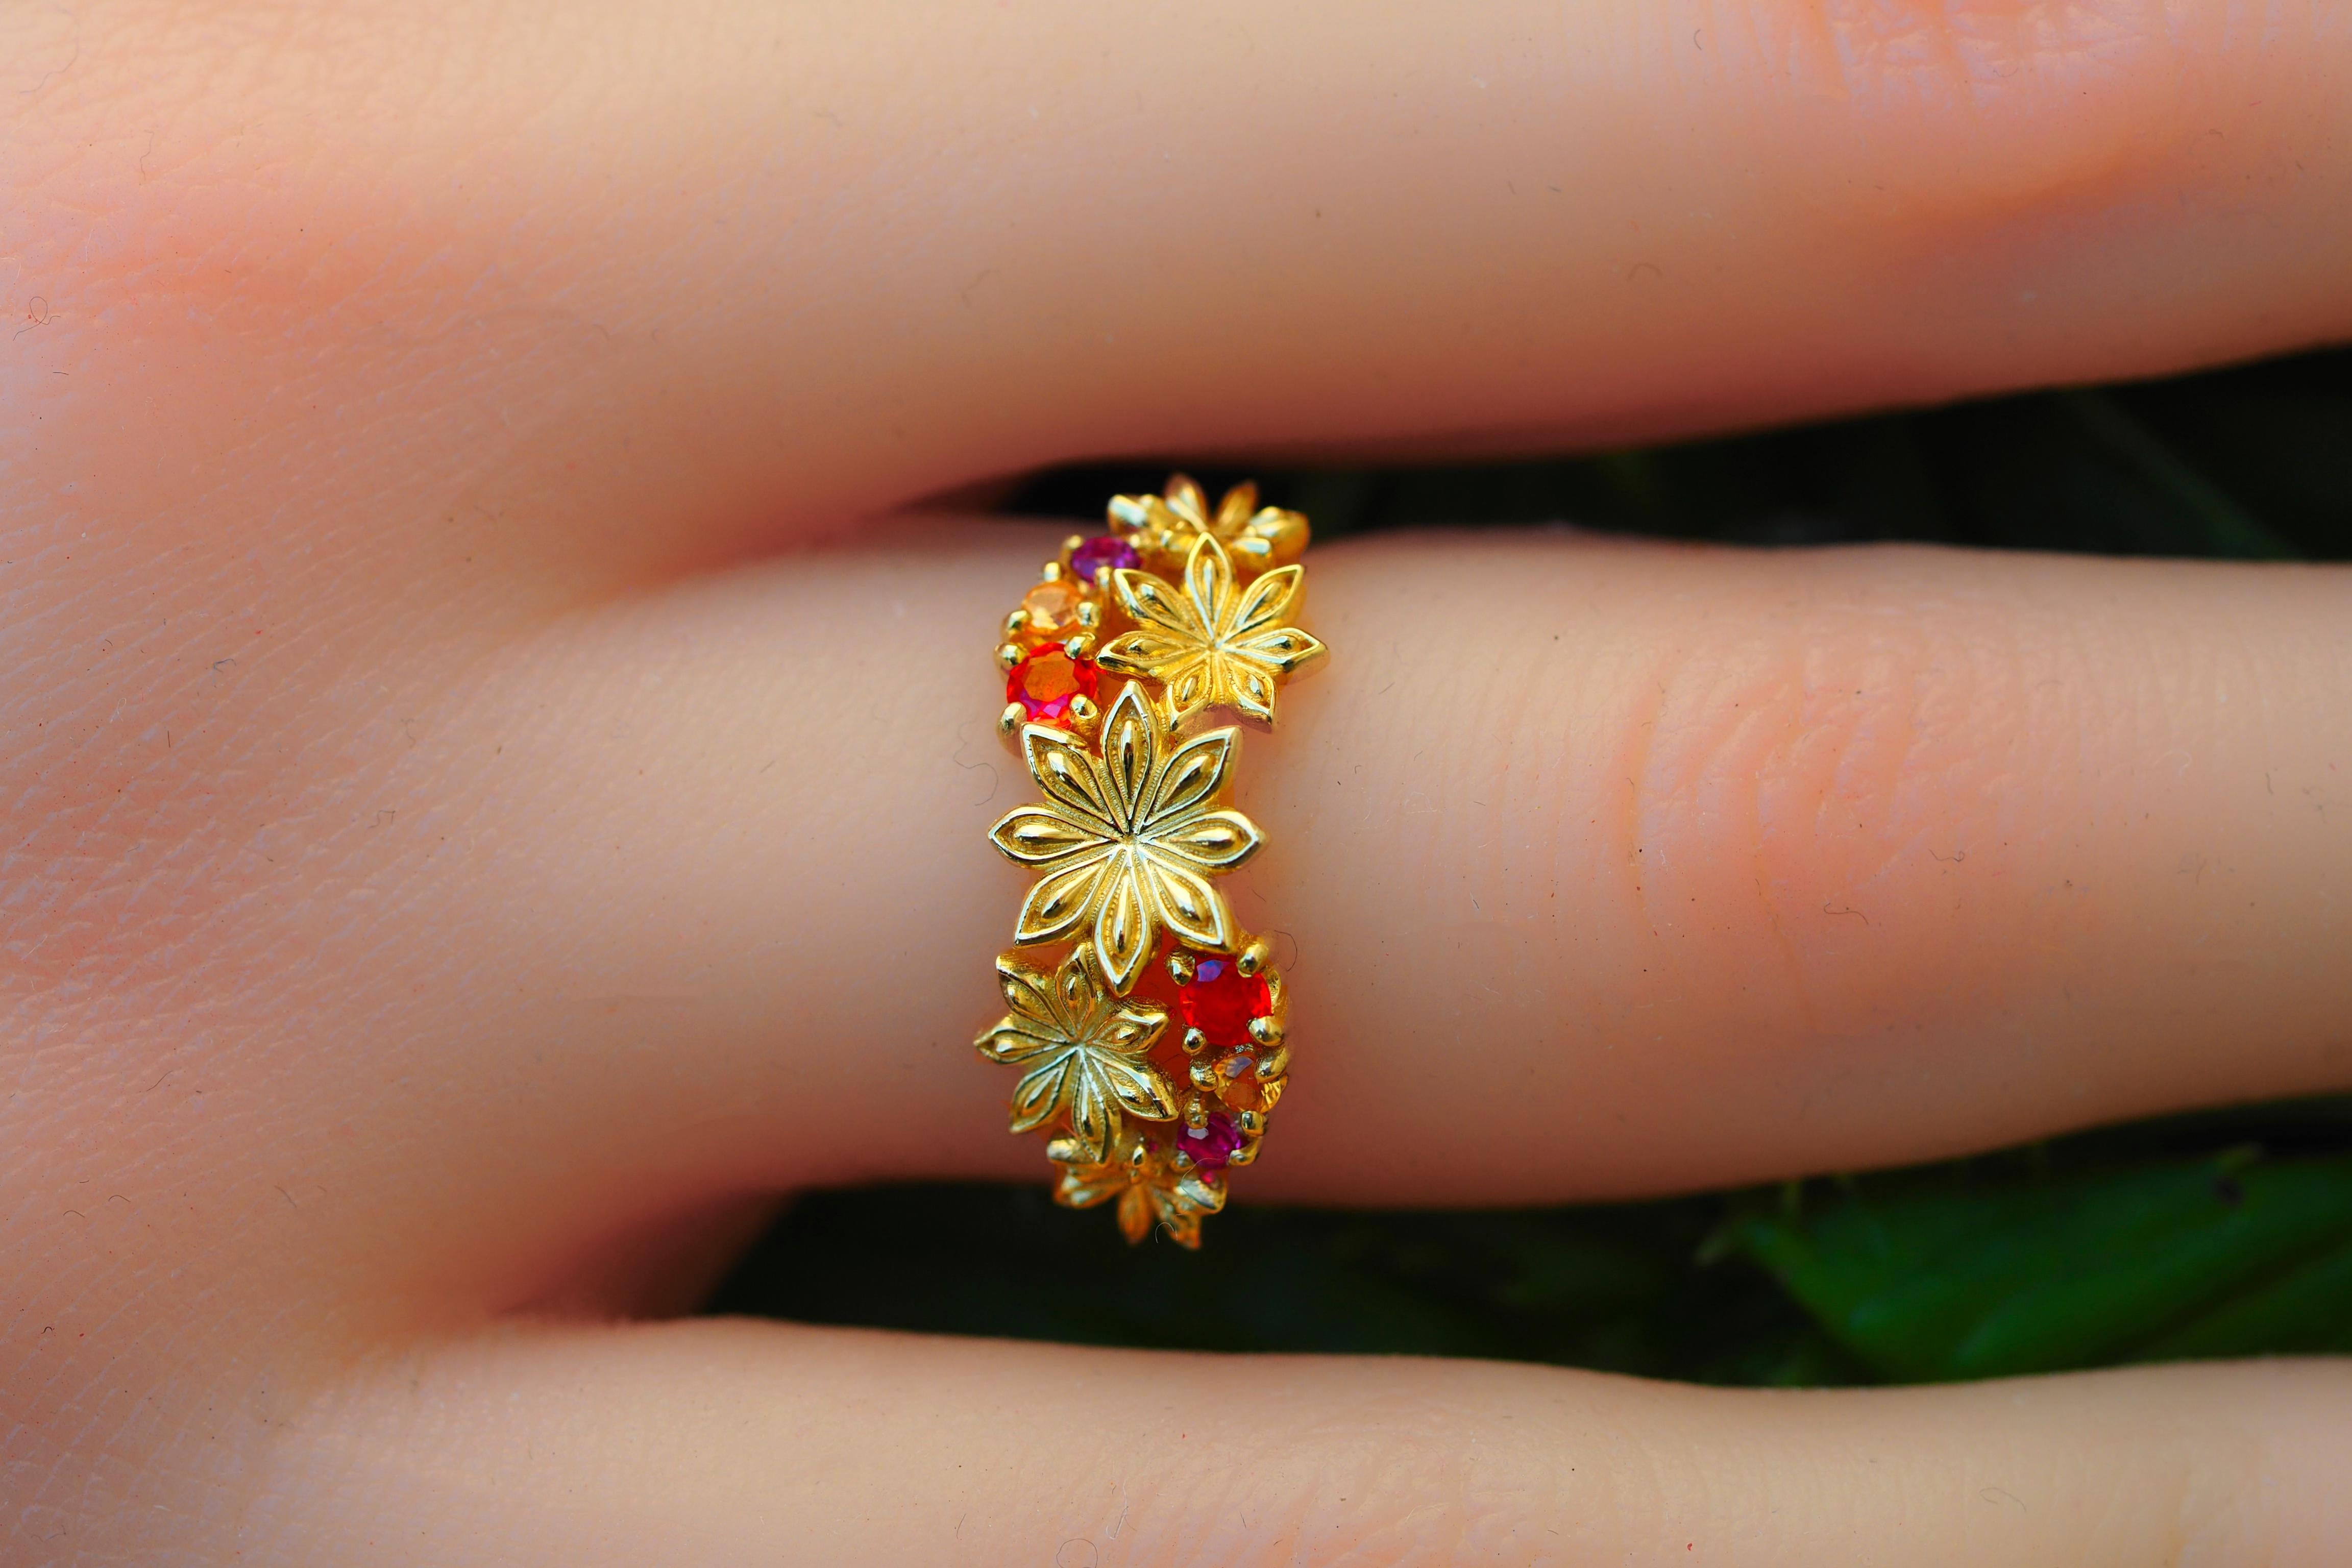 For Sale:  14k Gold Ring with Sapphires and Amethysts, Star Anise Flower Gold Ring. 9